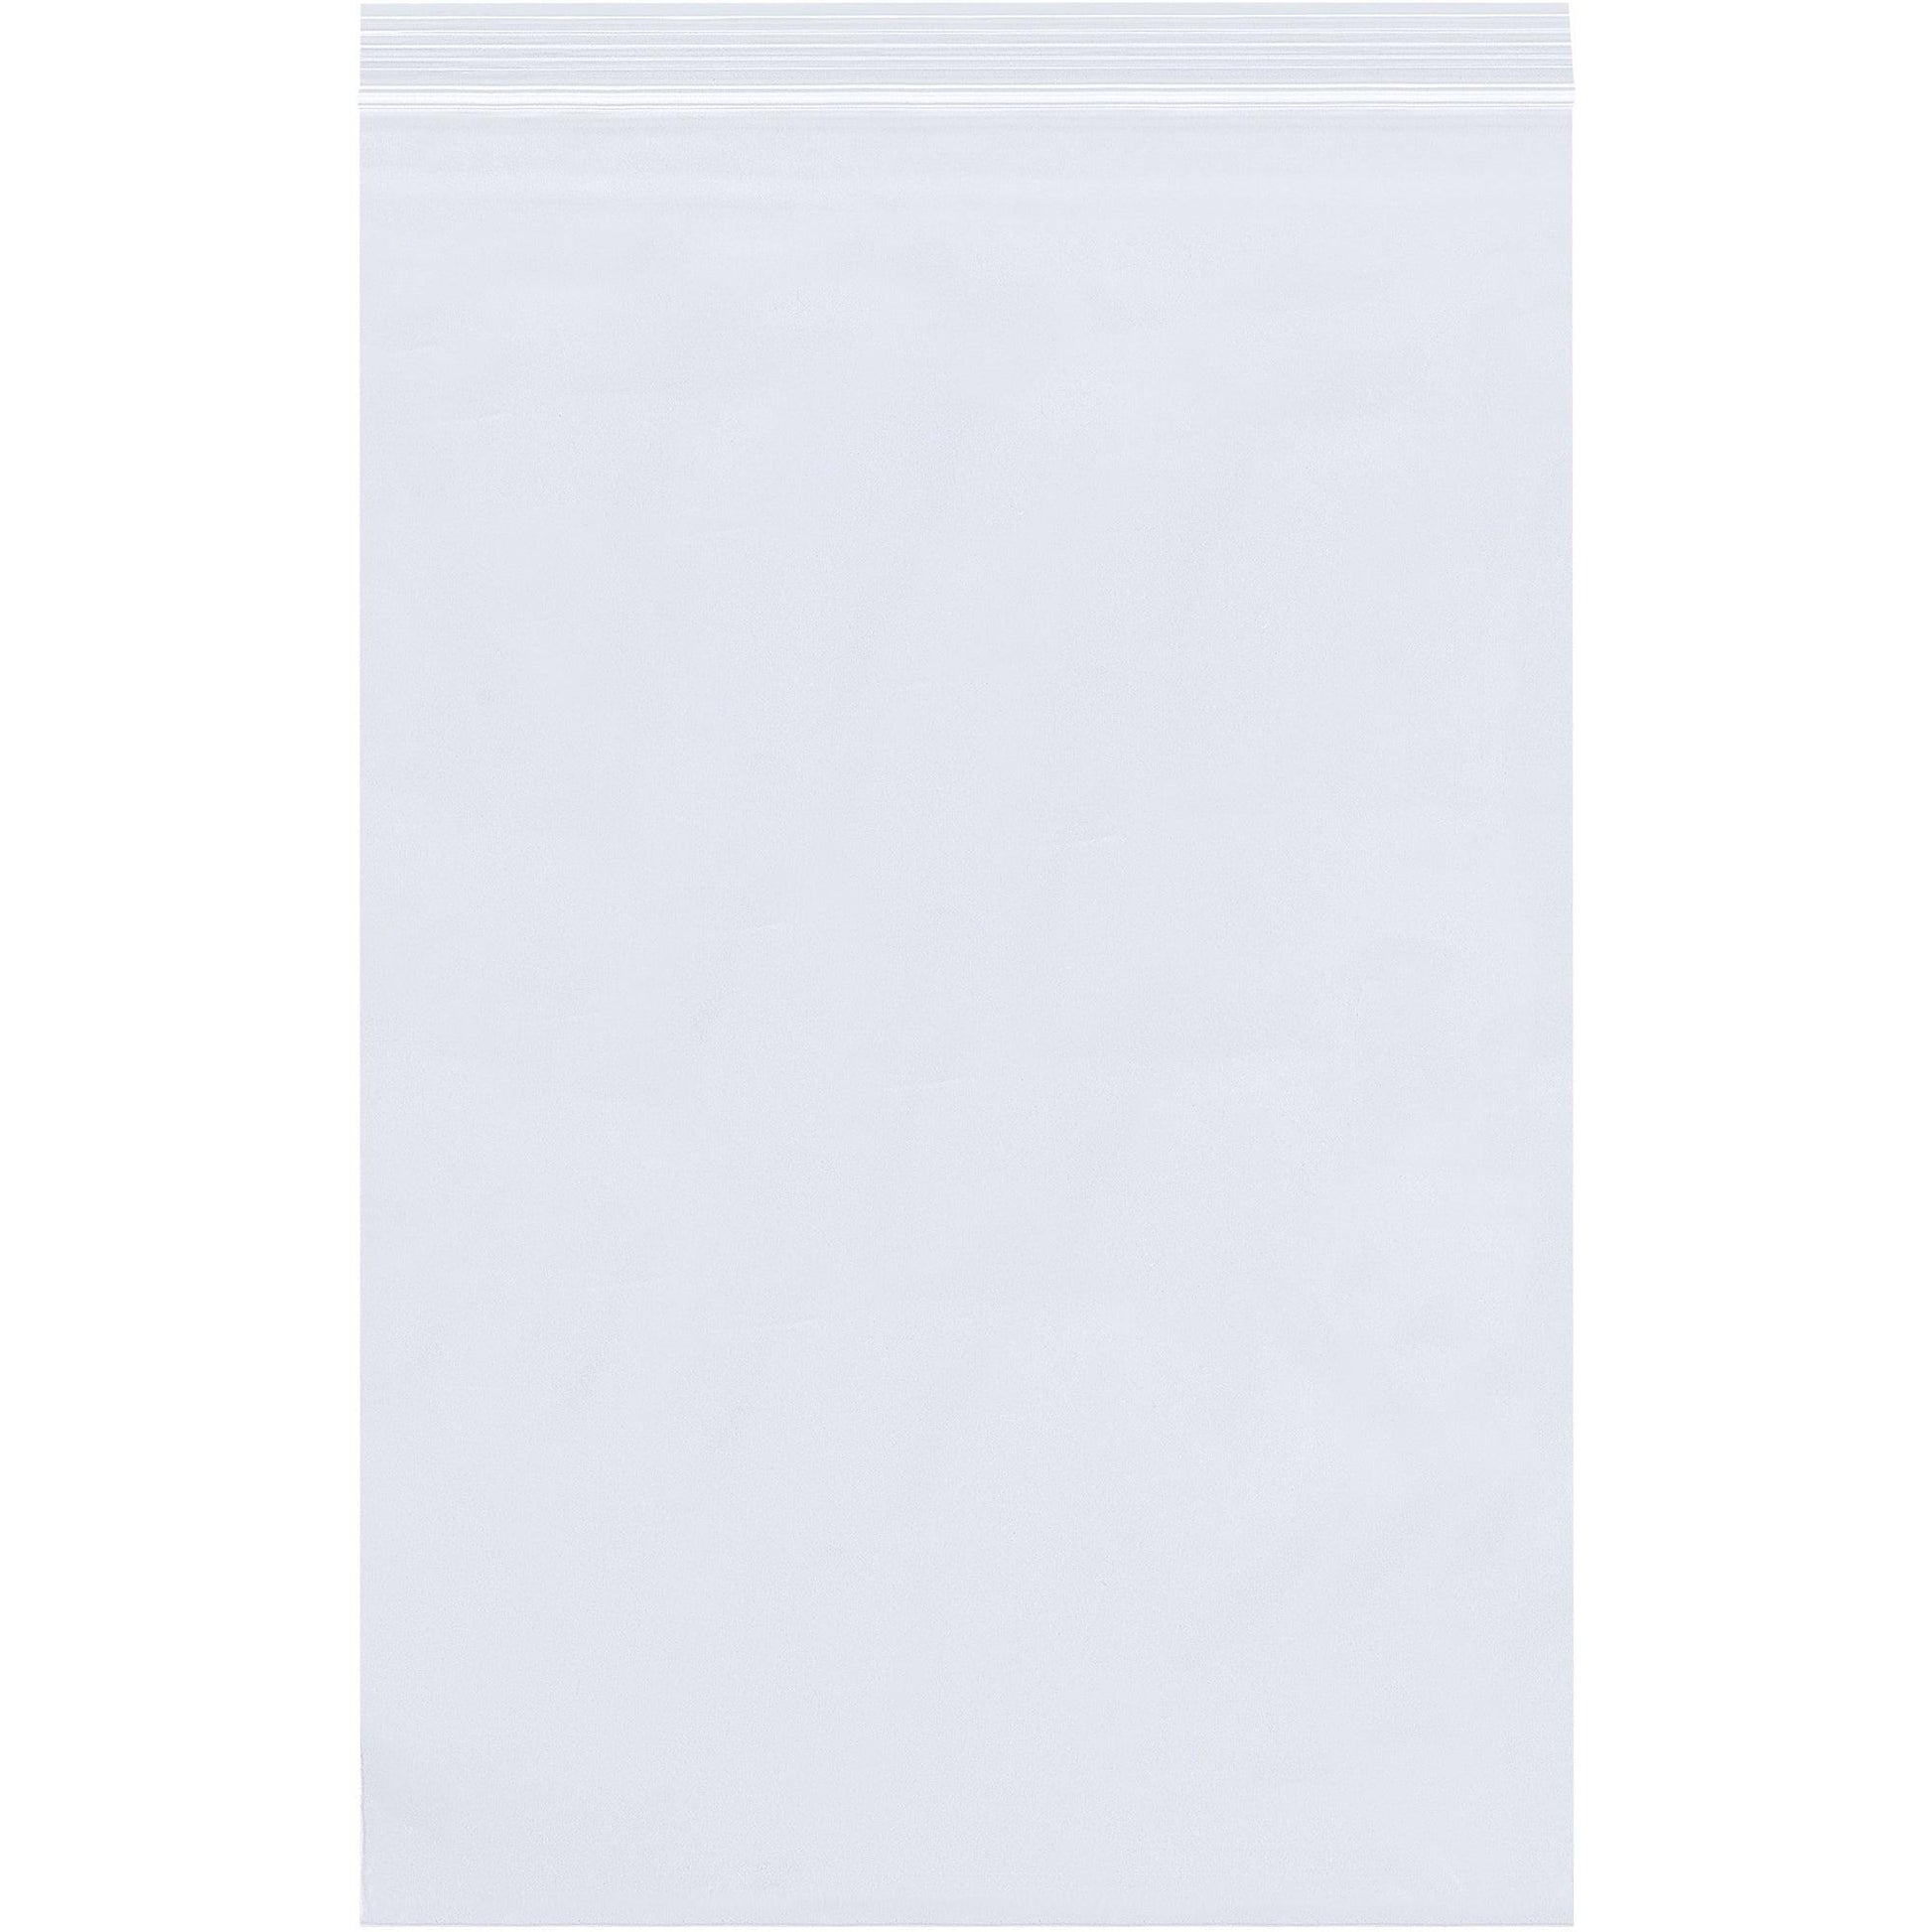 12 x 18" - 6 Mil Reclosable Poly Bags - PB3890